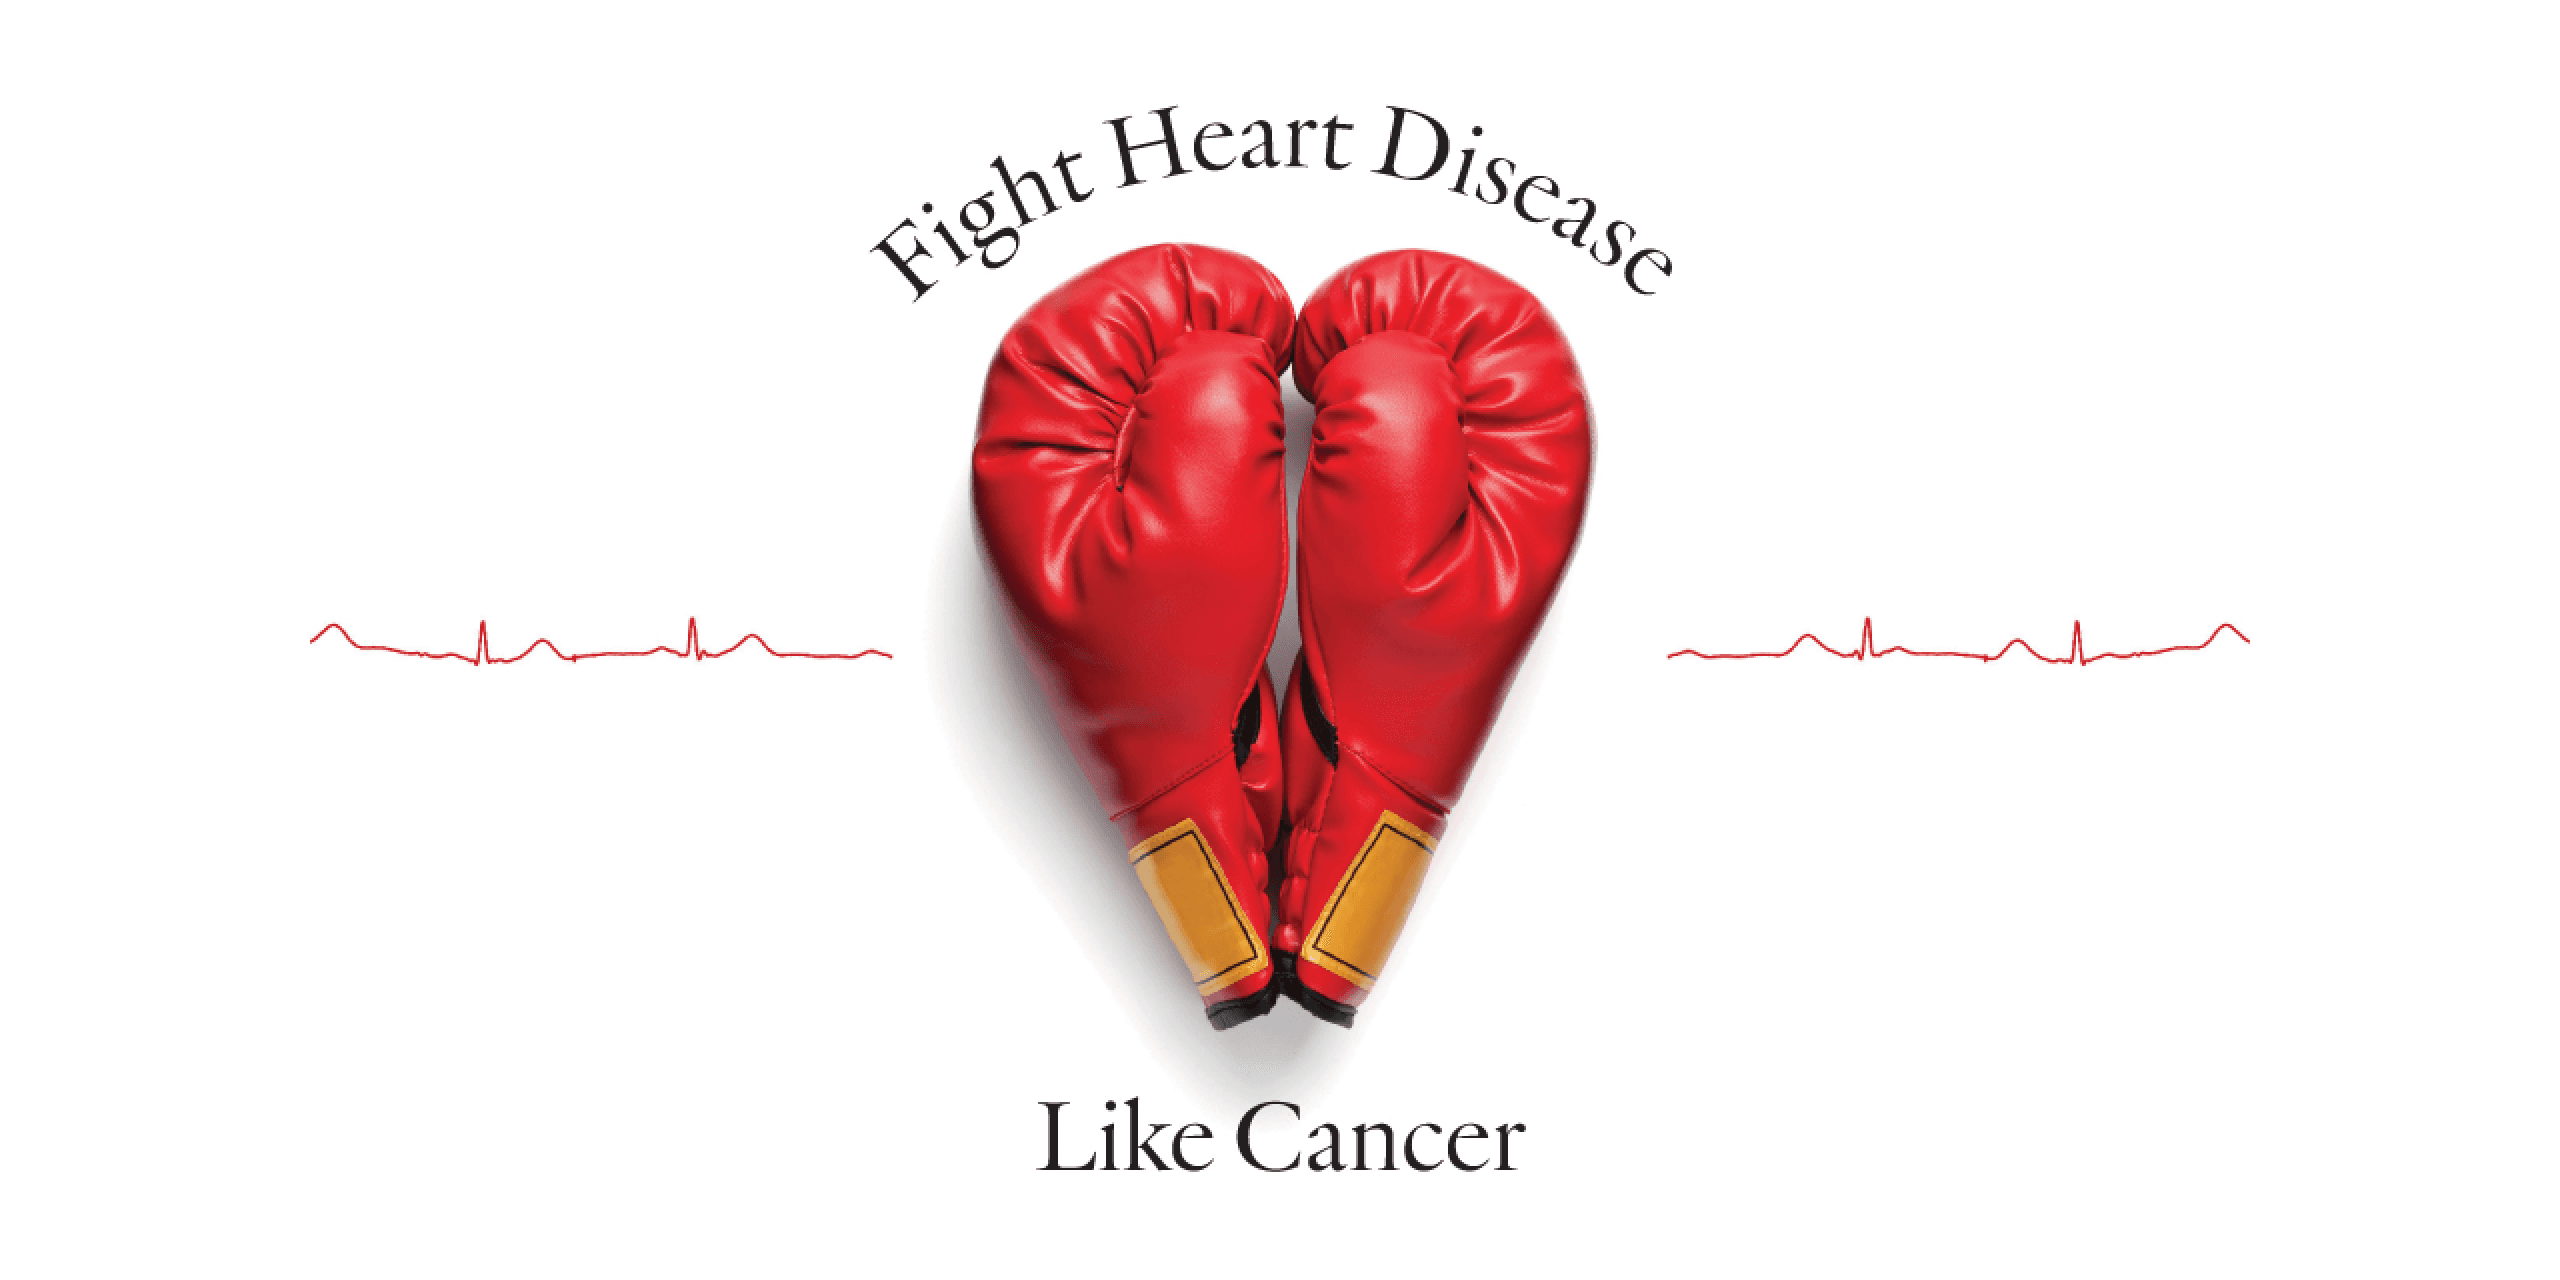 What if we fought against cardiovascular diseases as we fight against cancer